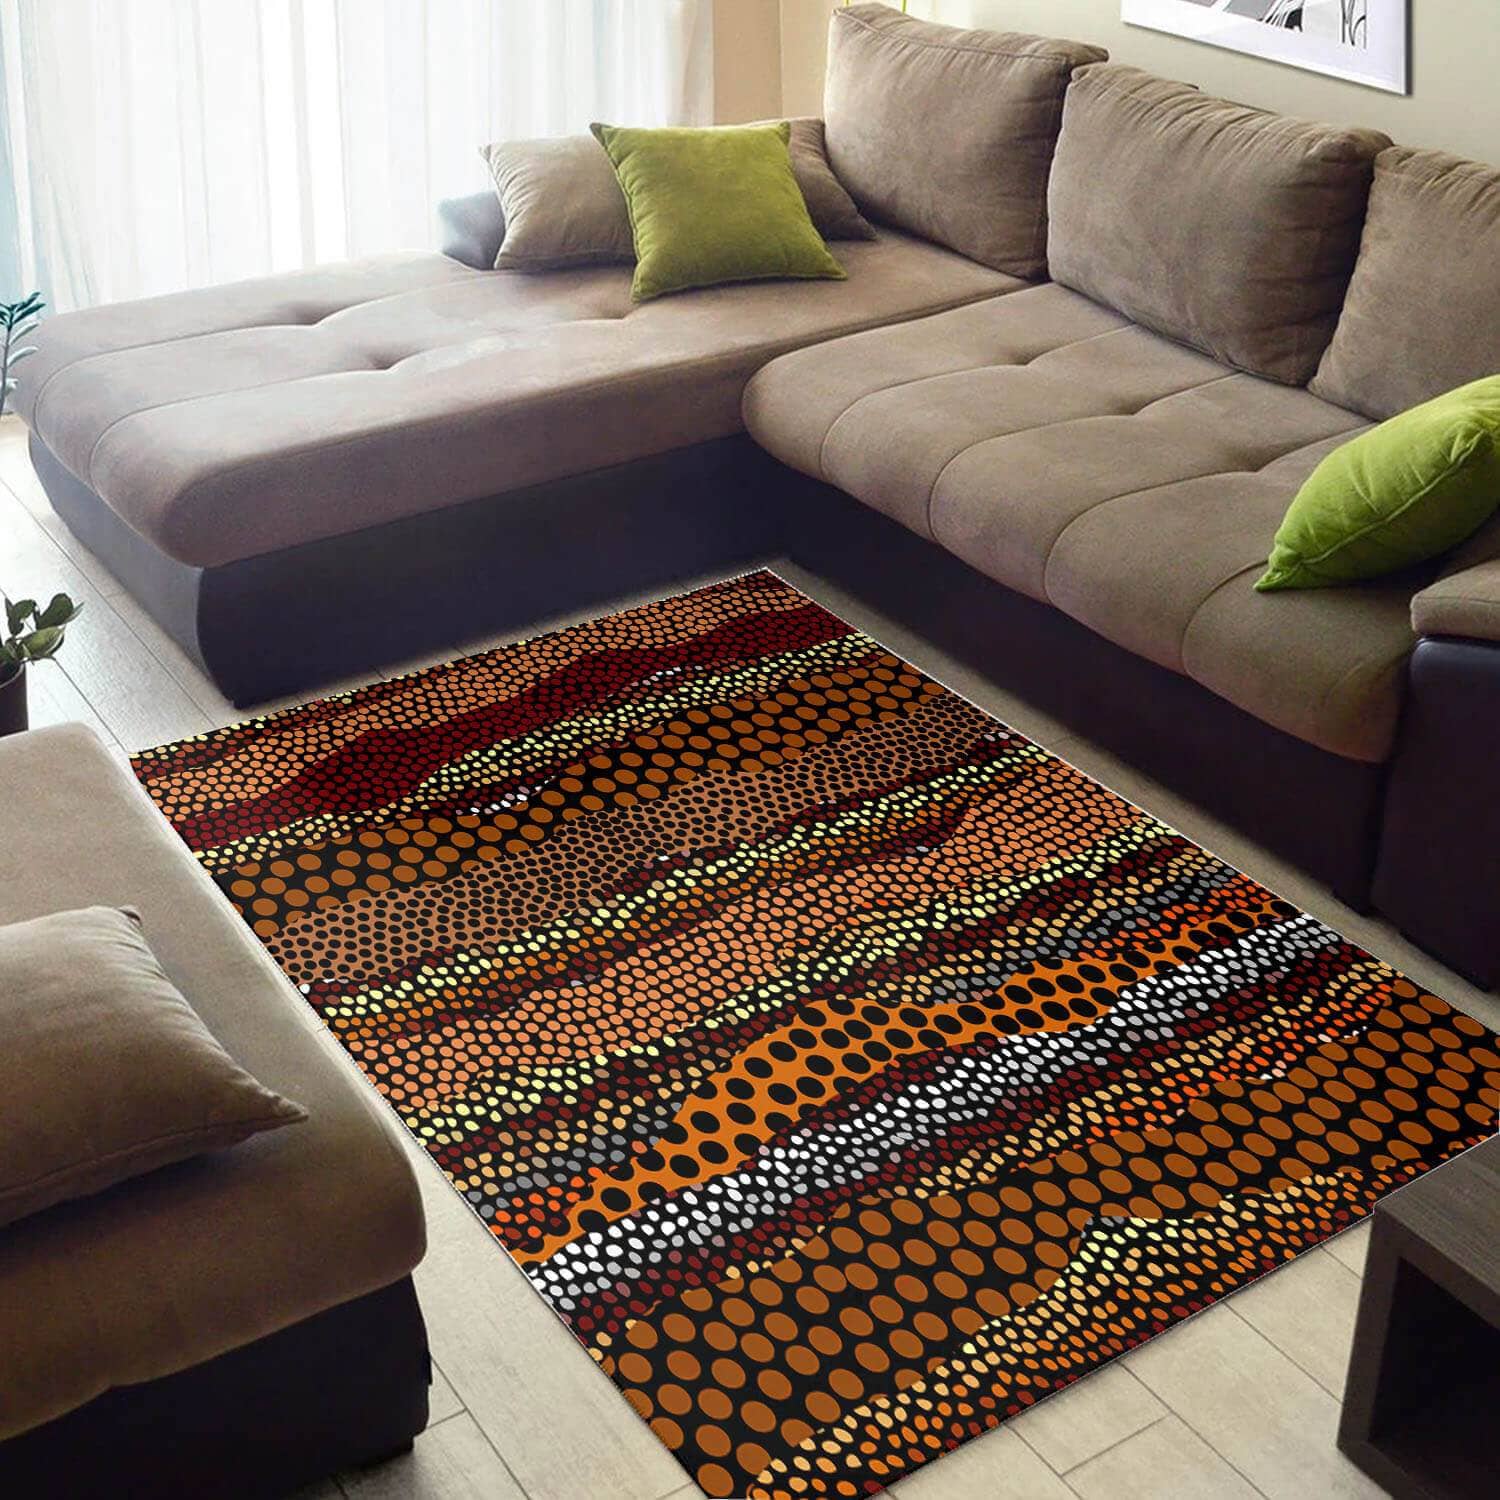 Nice African American Colorful Themed Afrocentric Art Style Area Inspired Living Room Rug